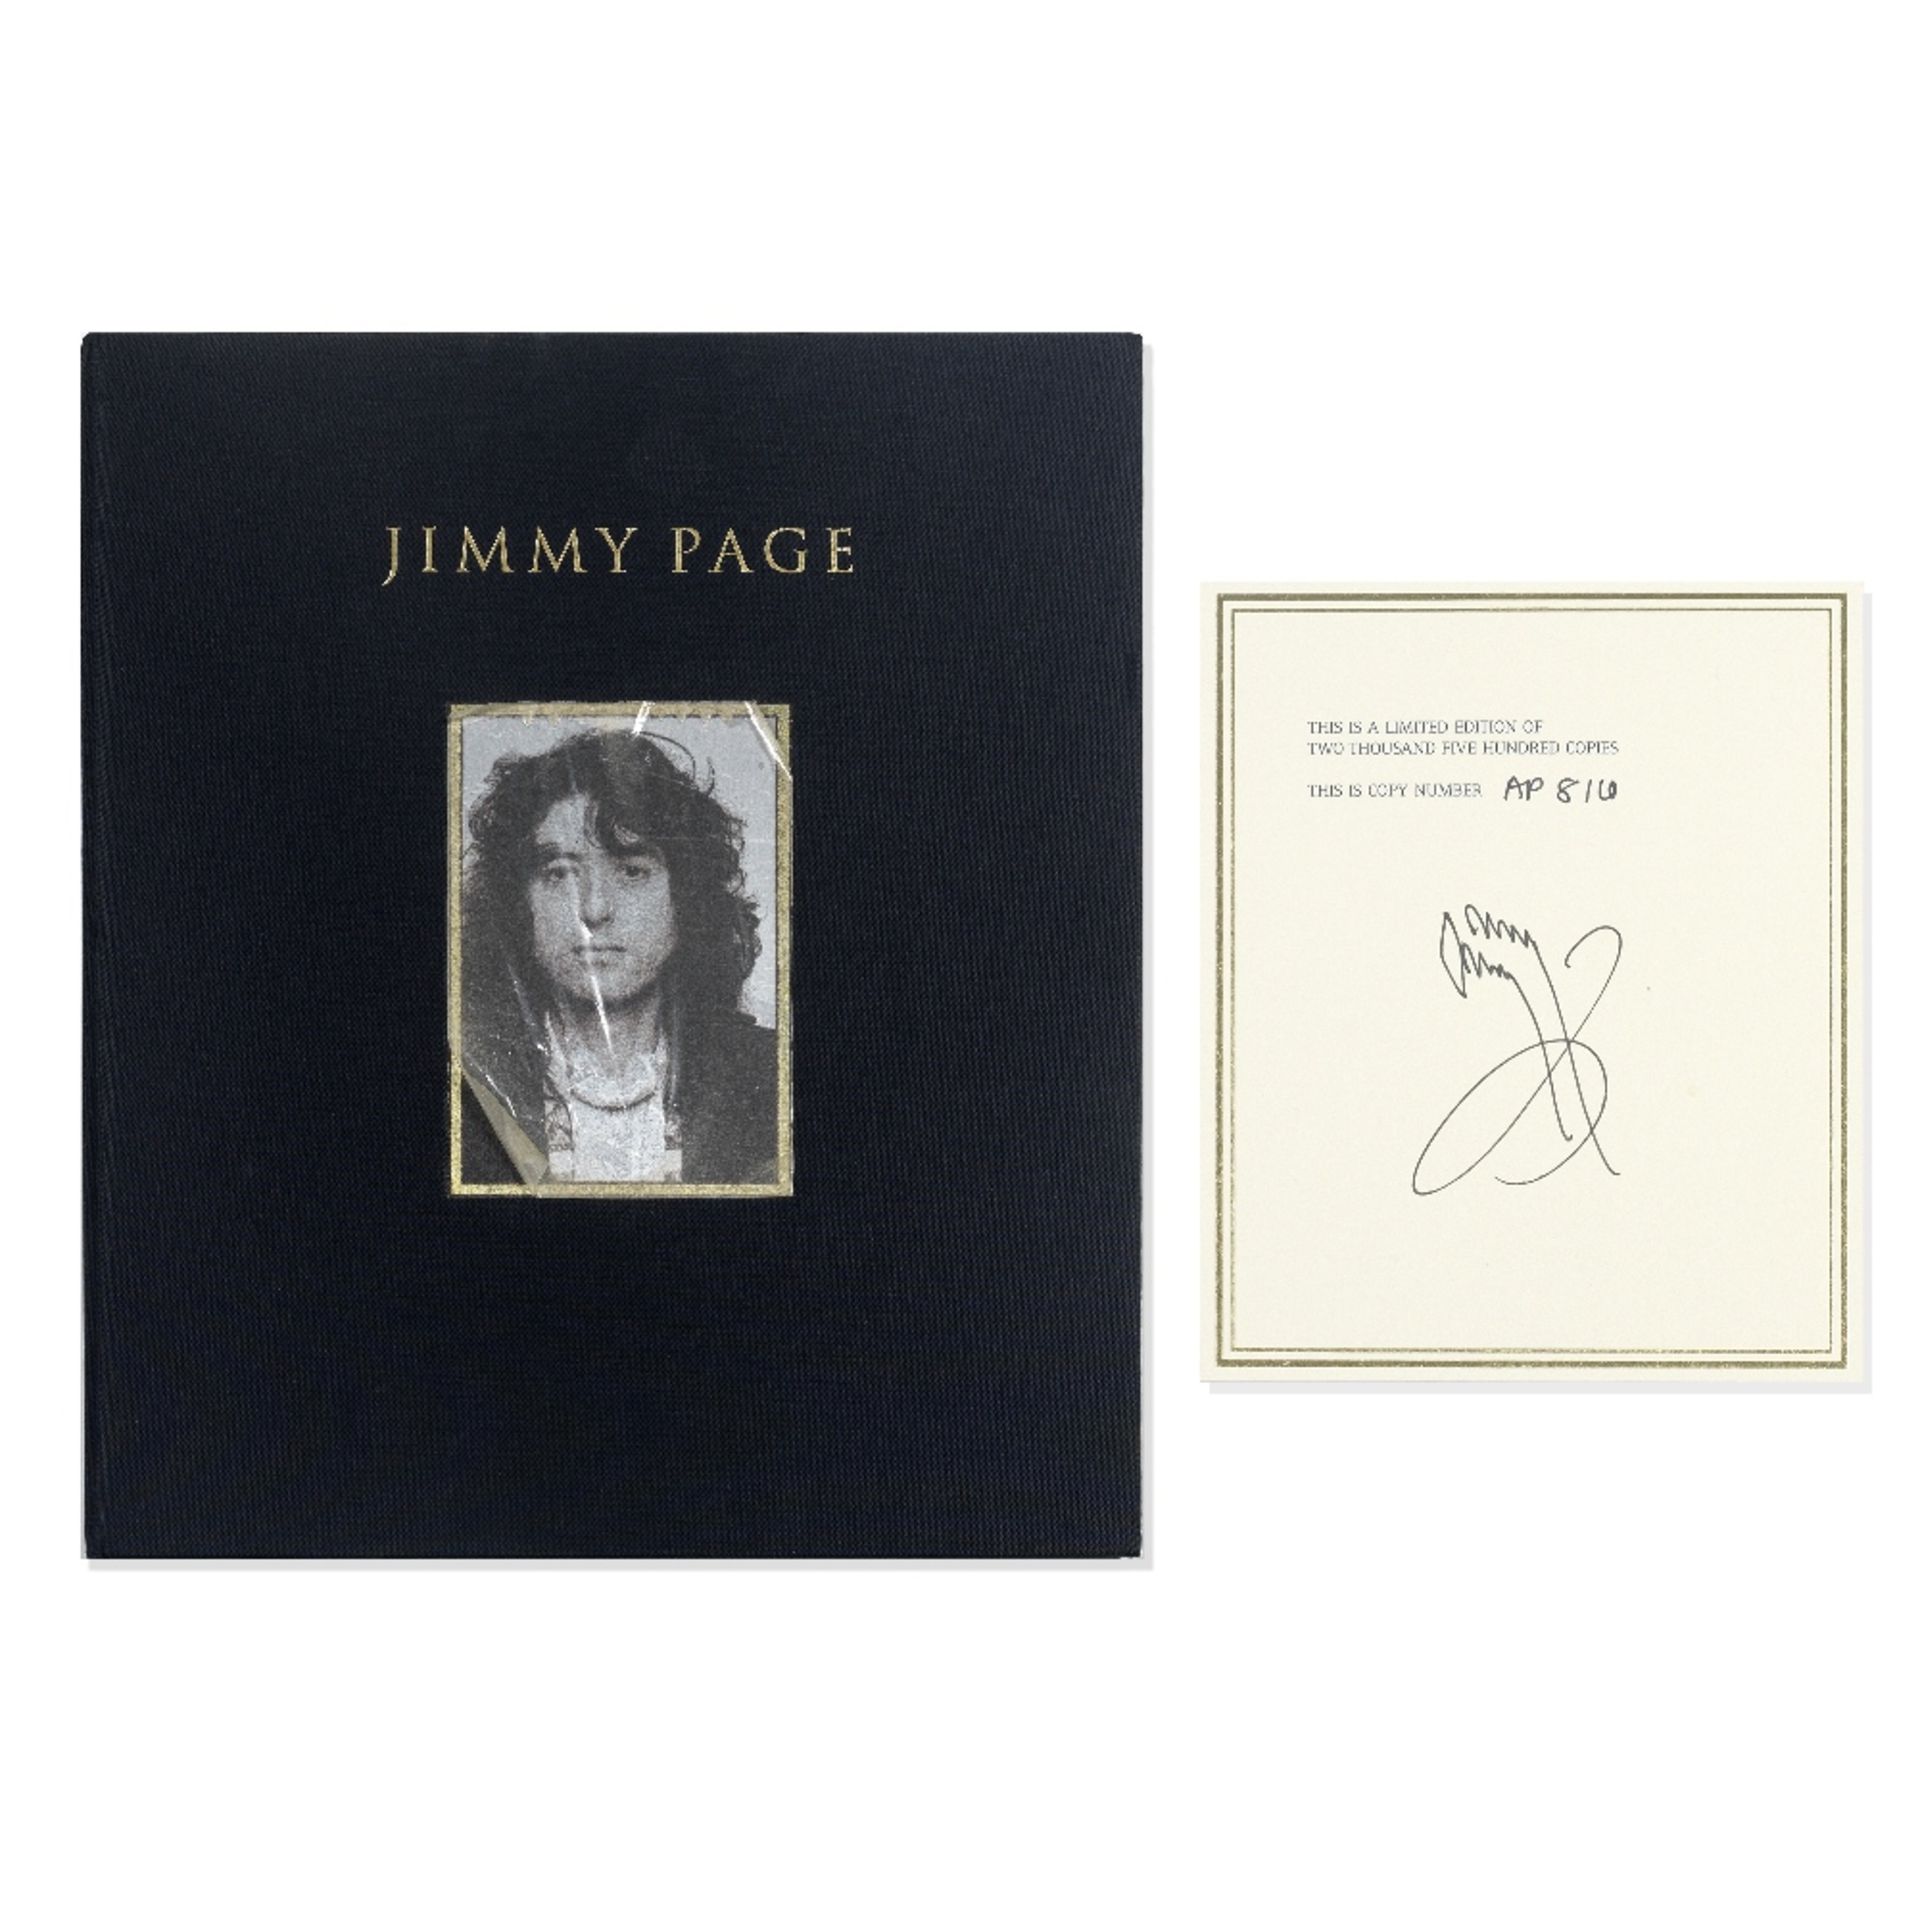 Jimmy Page: A Autographed Deluxe Edition Copy Of Jimmy Page, Genesis Publications, 2010,